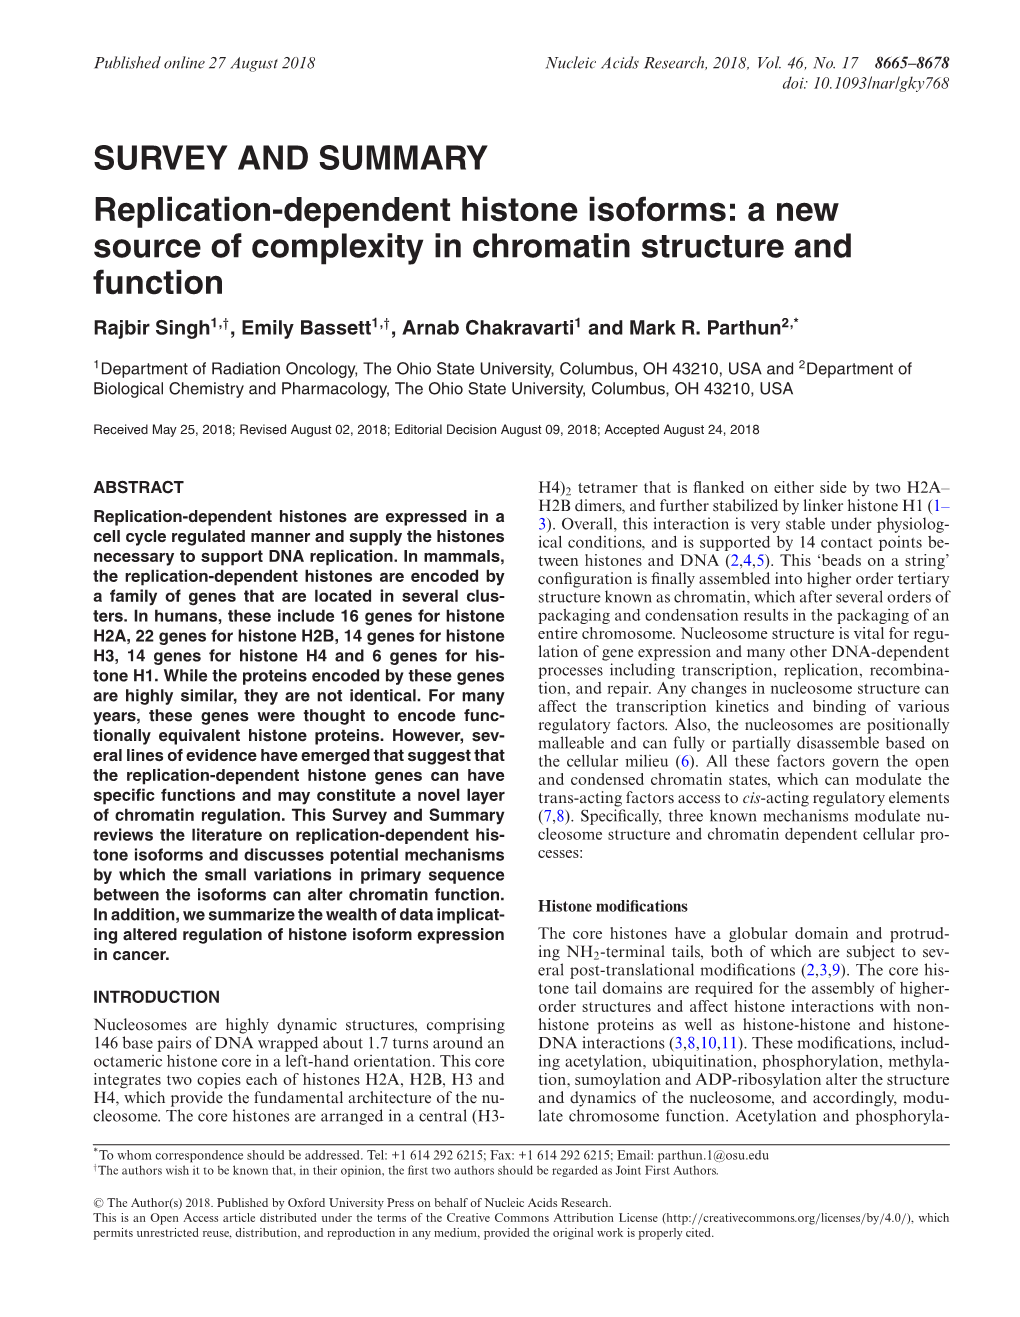 SURVEY and SUMMARY Replication-Dependent Histone Isoforms: A